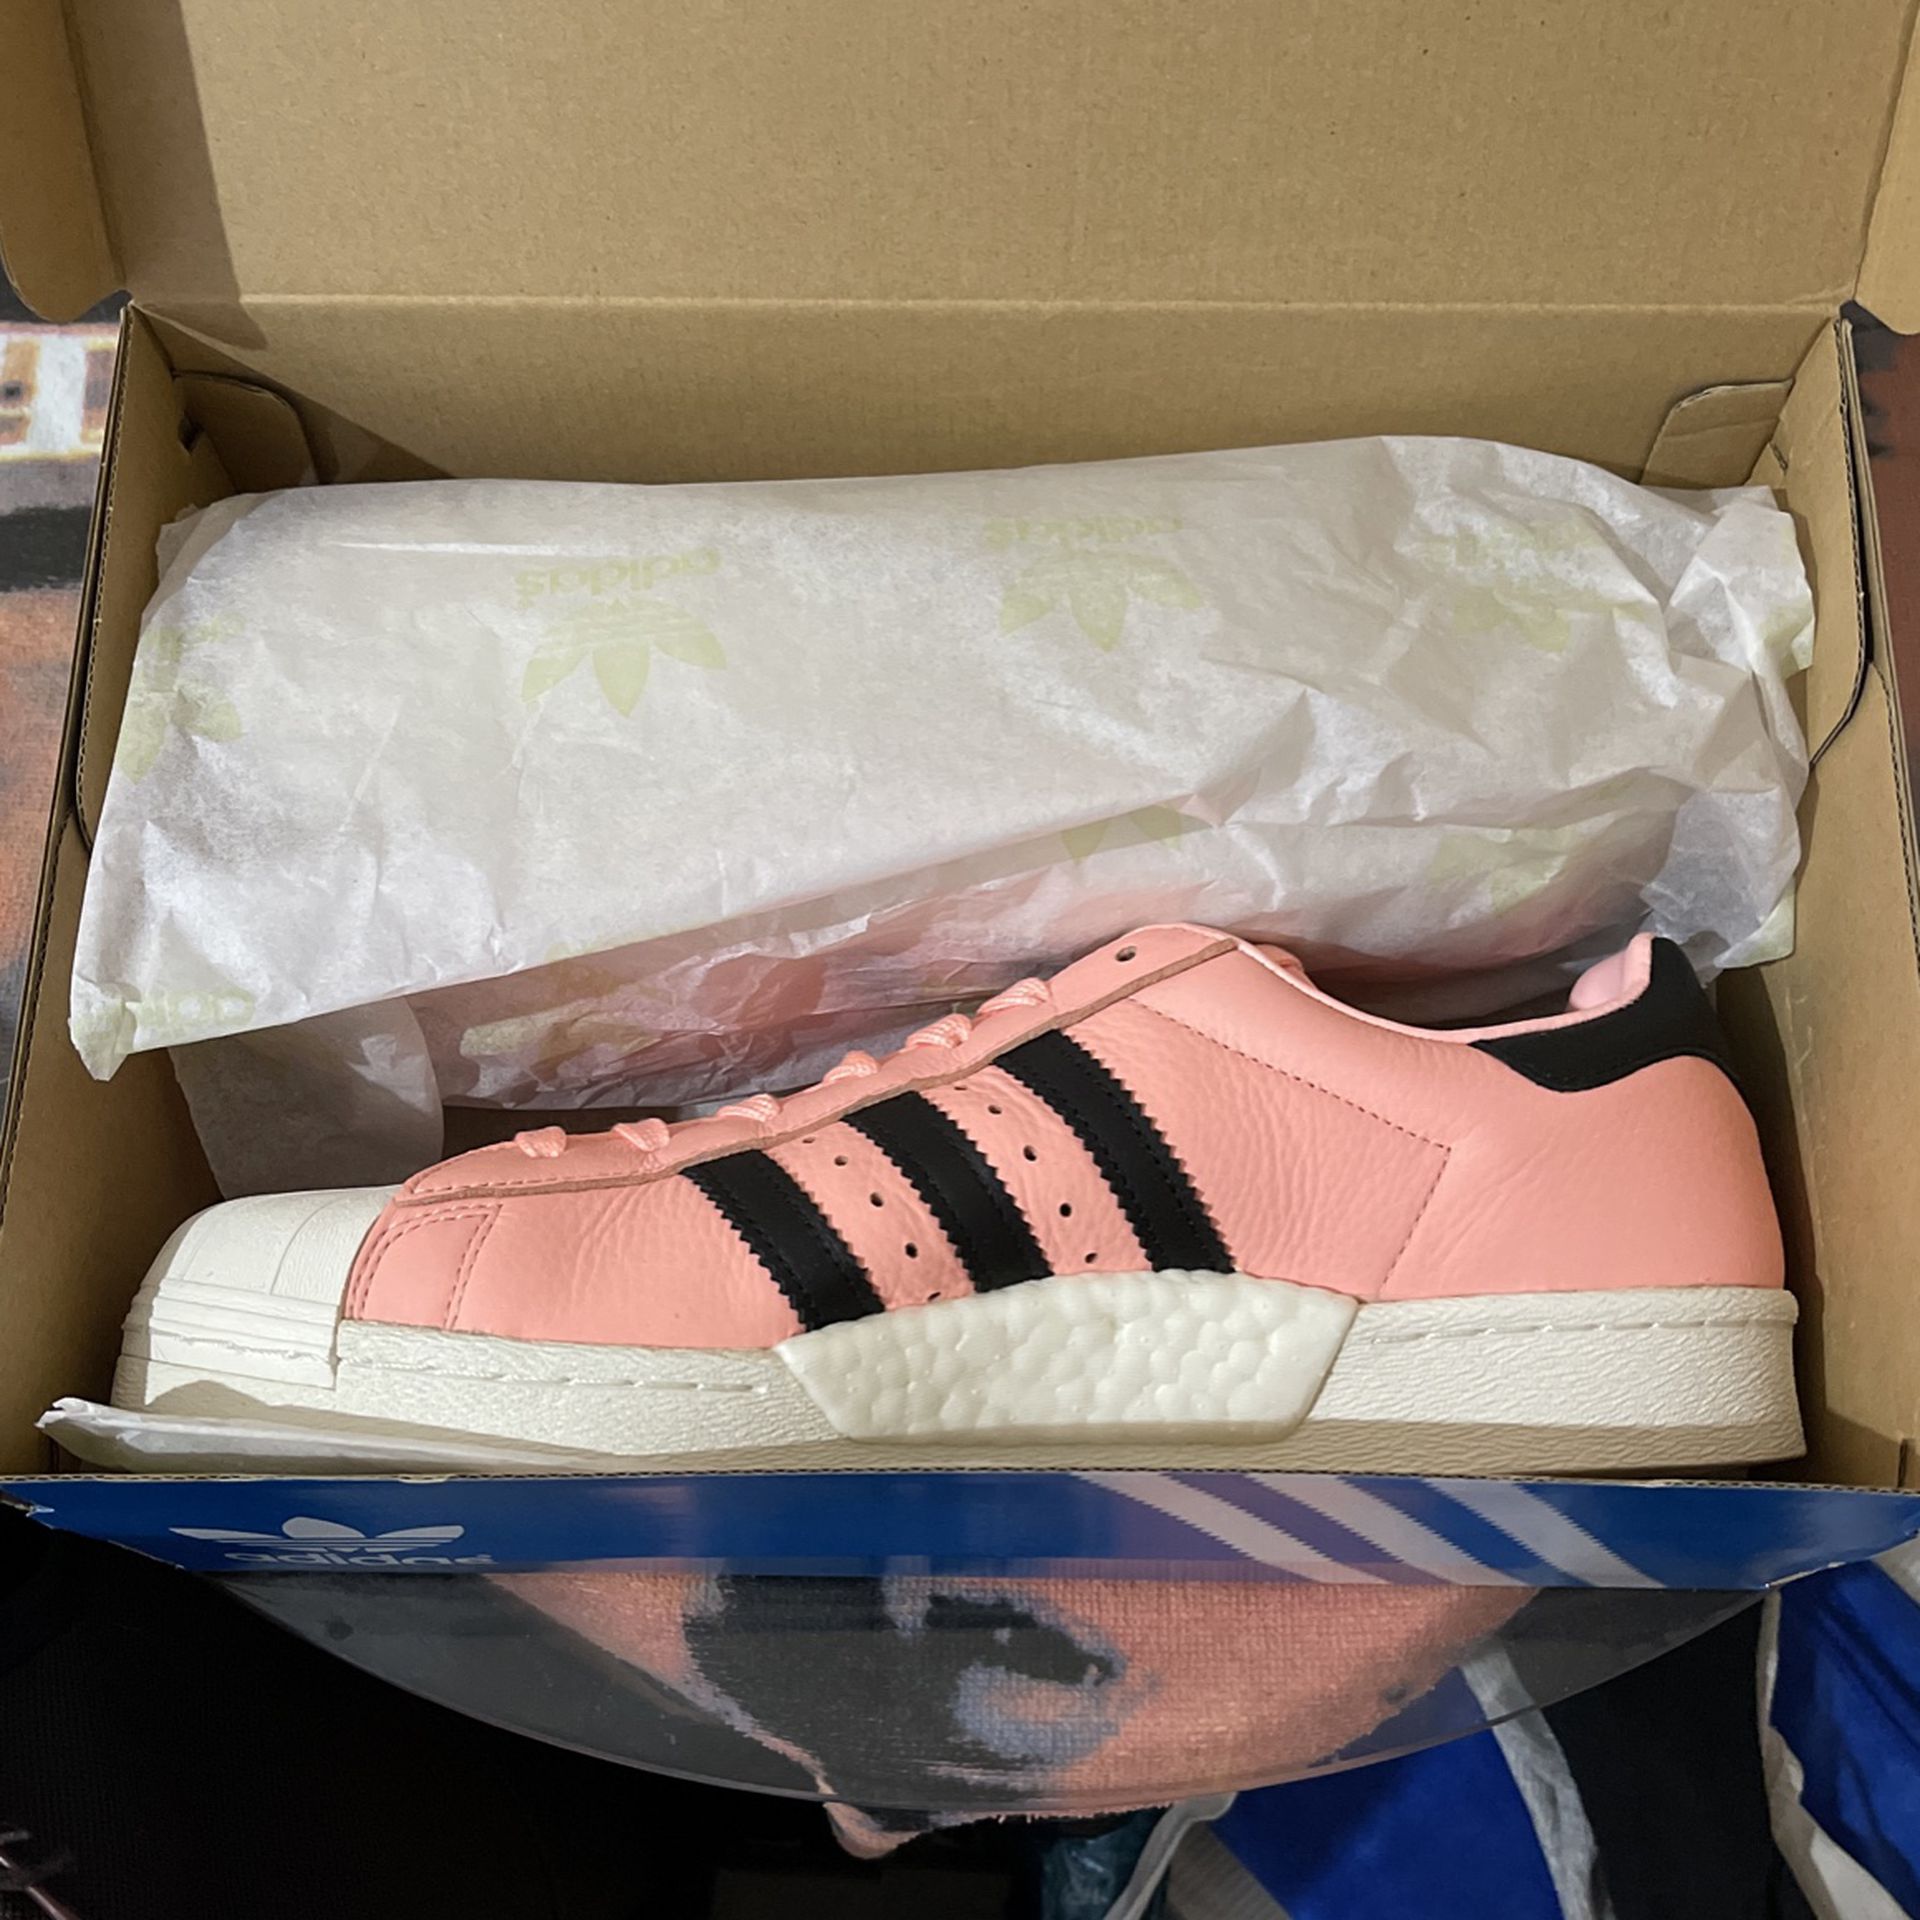 Adidas Superstar US Men's 12 Coral, Black, And White for Sale in Rolling Hills, CA OfferUp